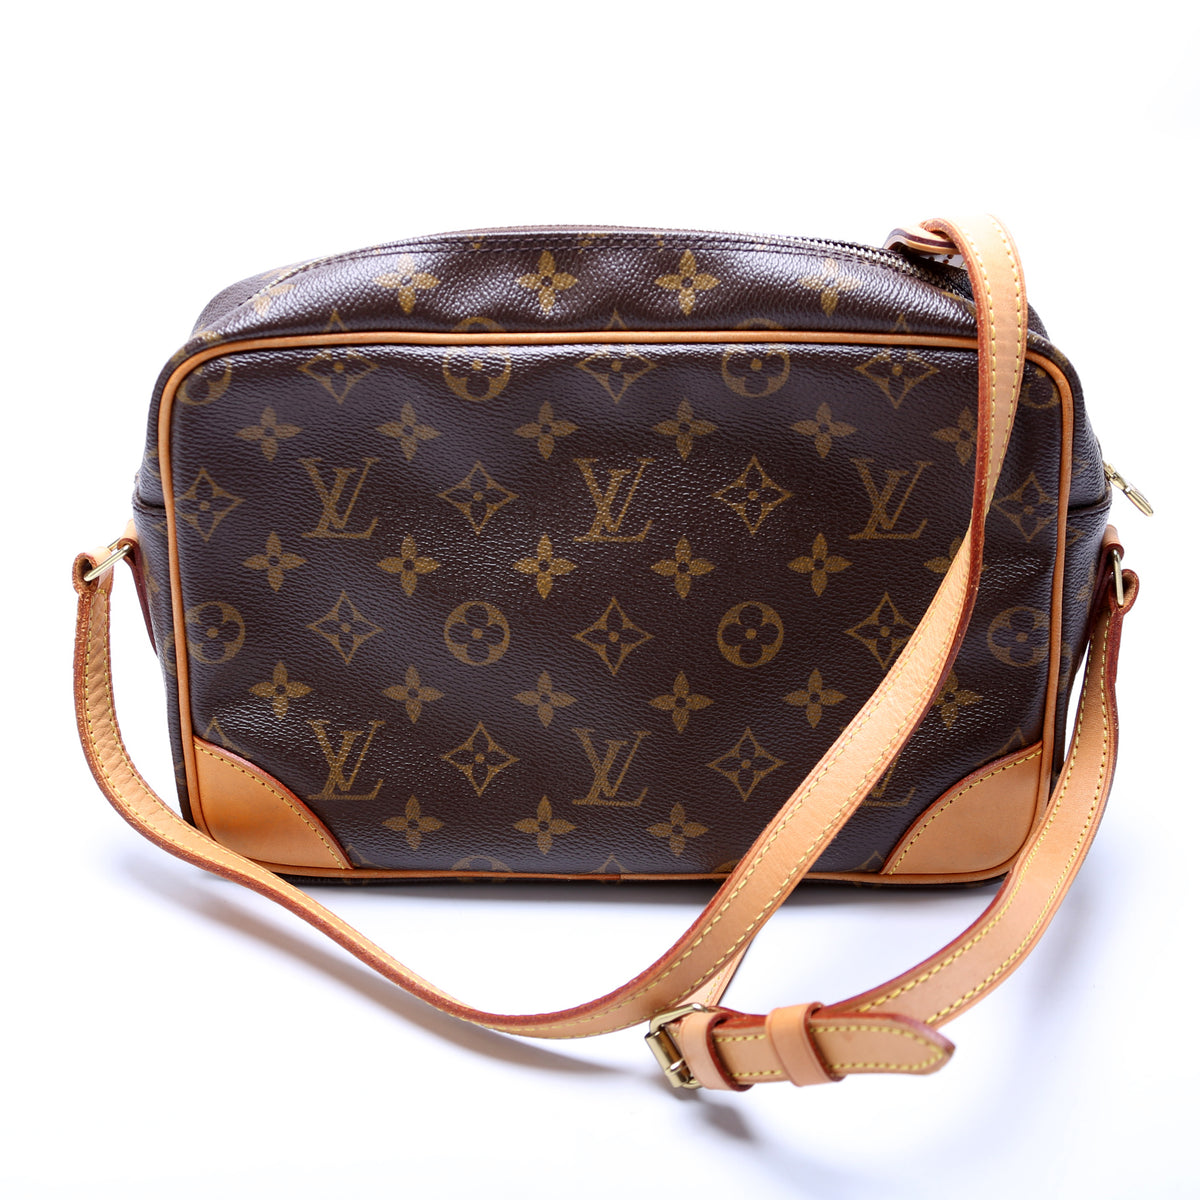 Louis Vuitton, Bags, Louis Vuitton Trocadero Crossbody Messenger Bag Pm  New With Tags